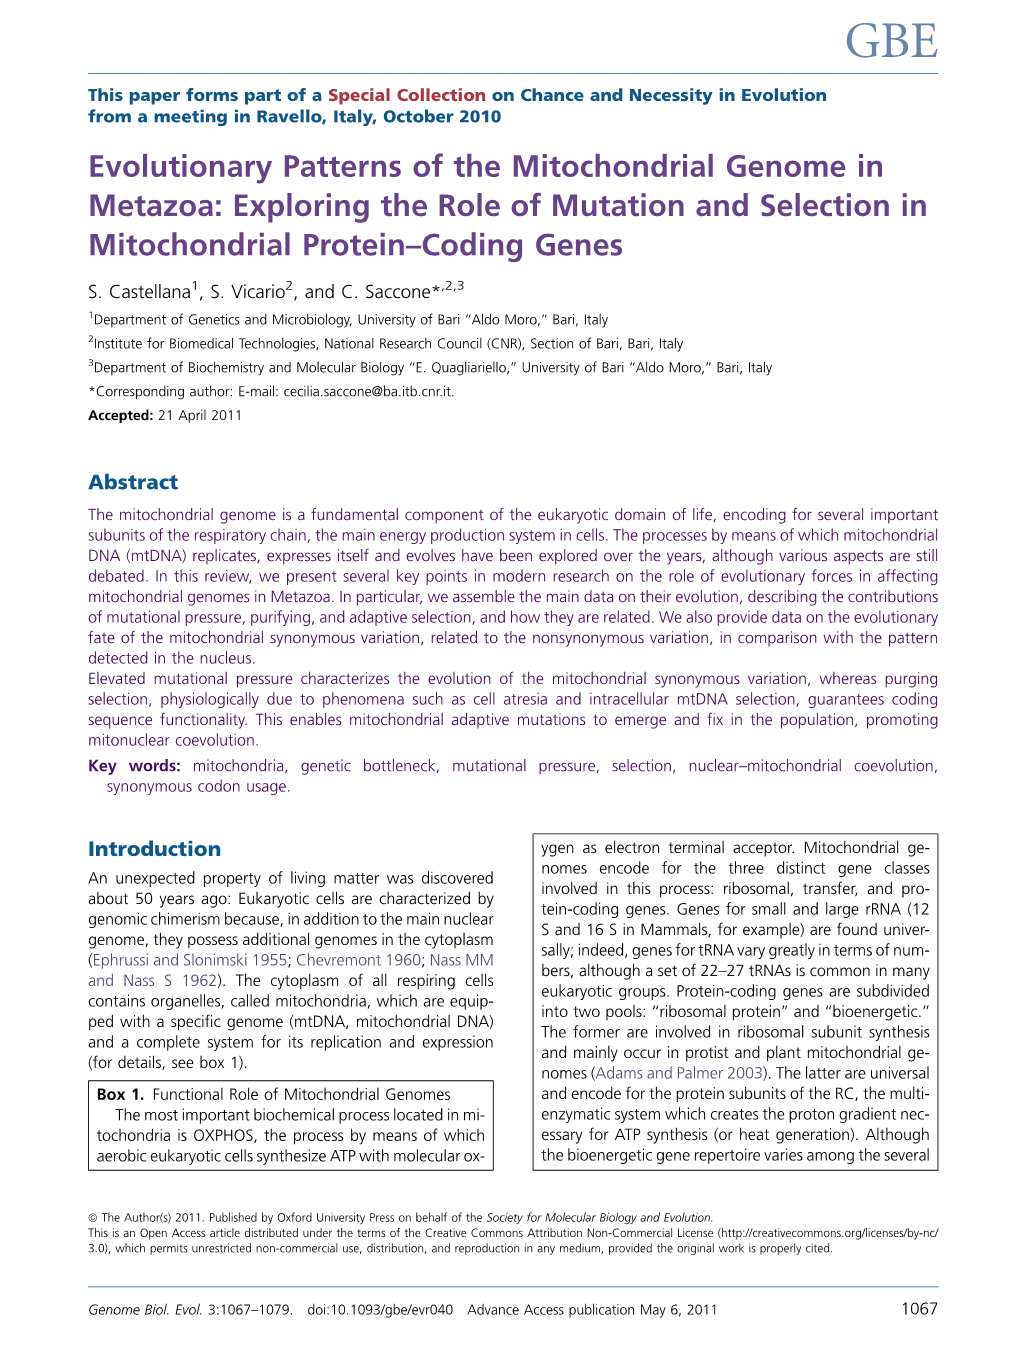 Evolutionary Patterns of the Mitochondrial Genome in Metazoa: Exploring the Role of Mutation and Selection in Mitochondrial Protein–Coding Genes